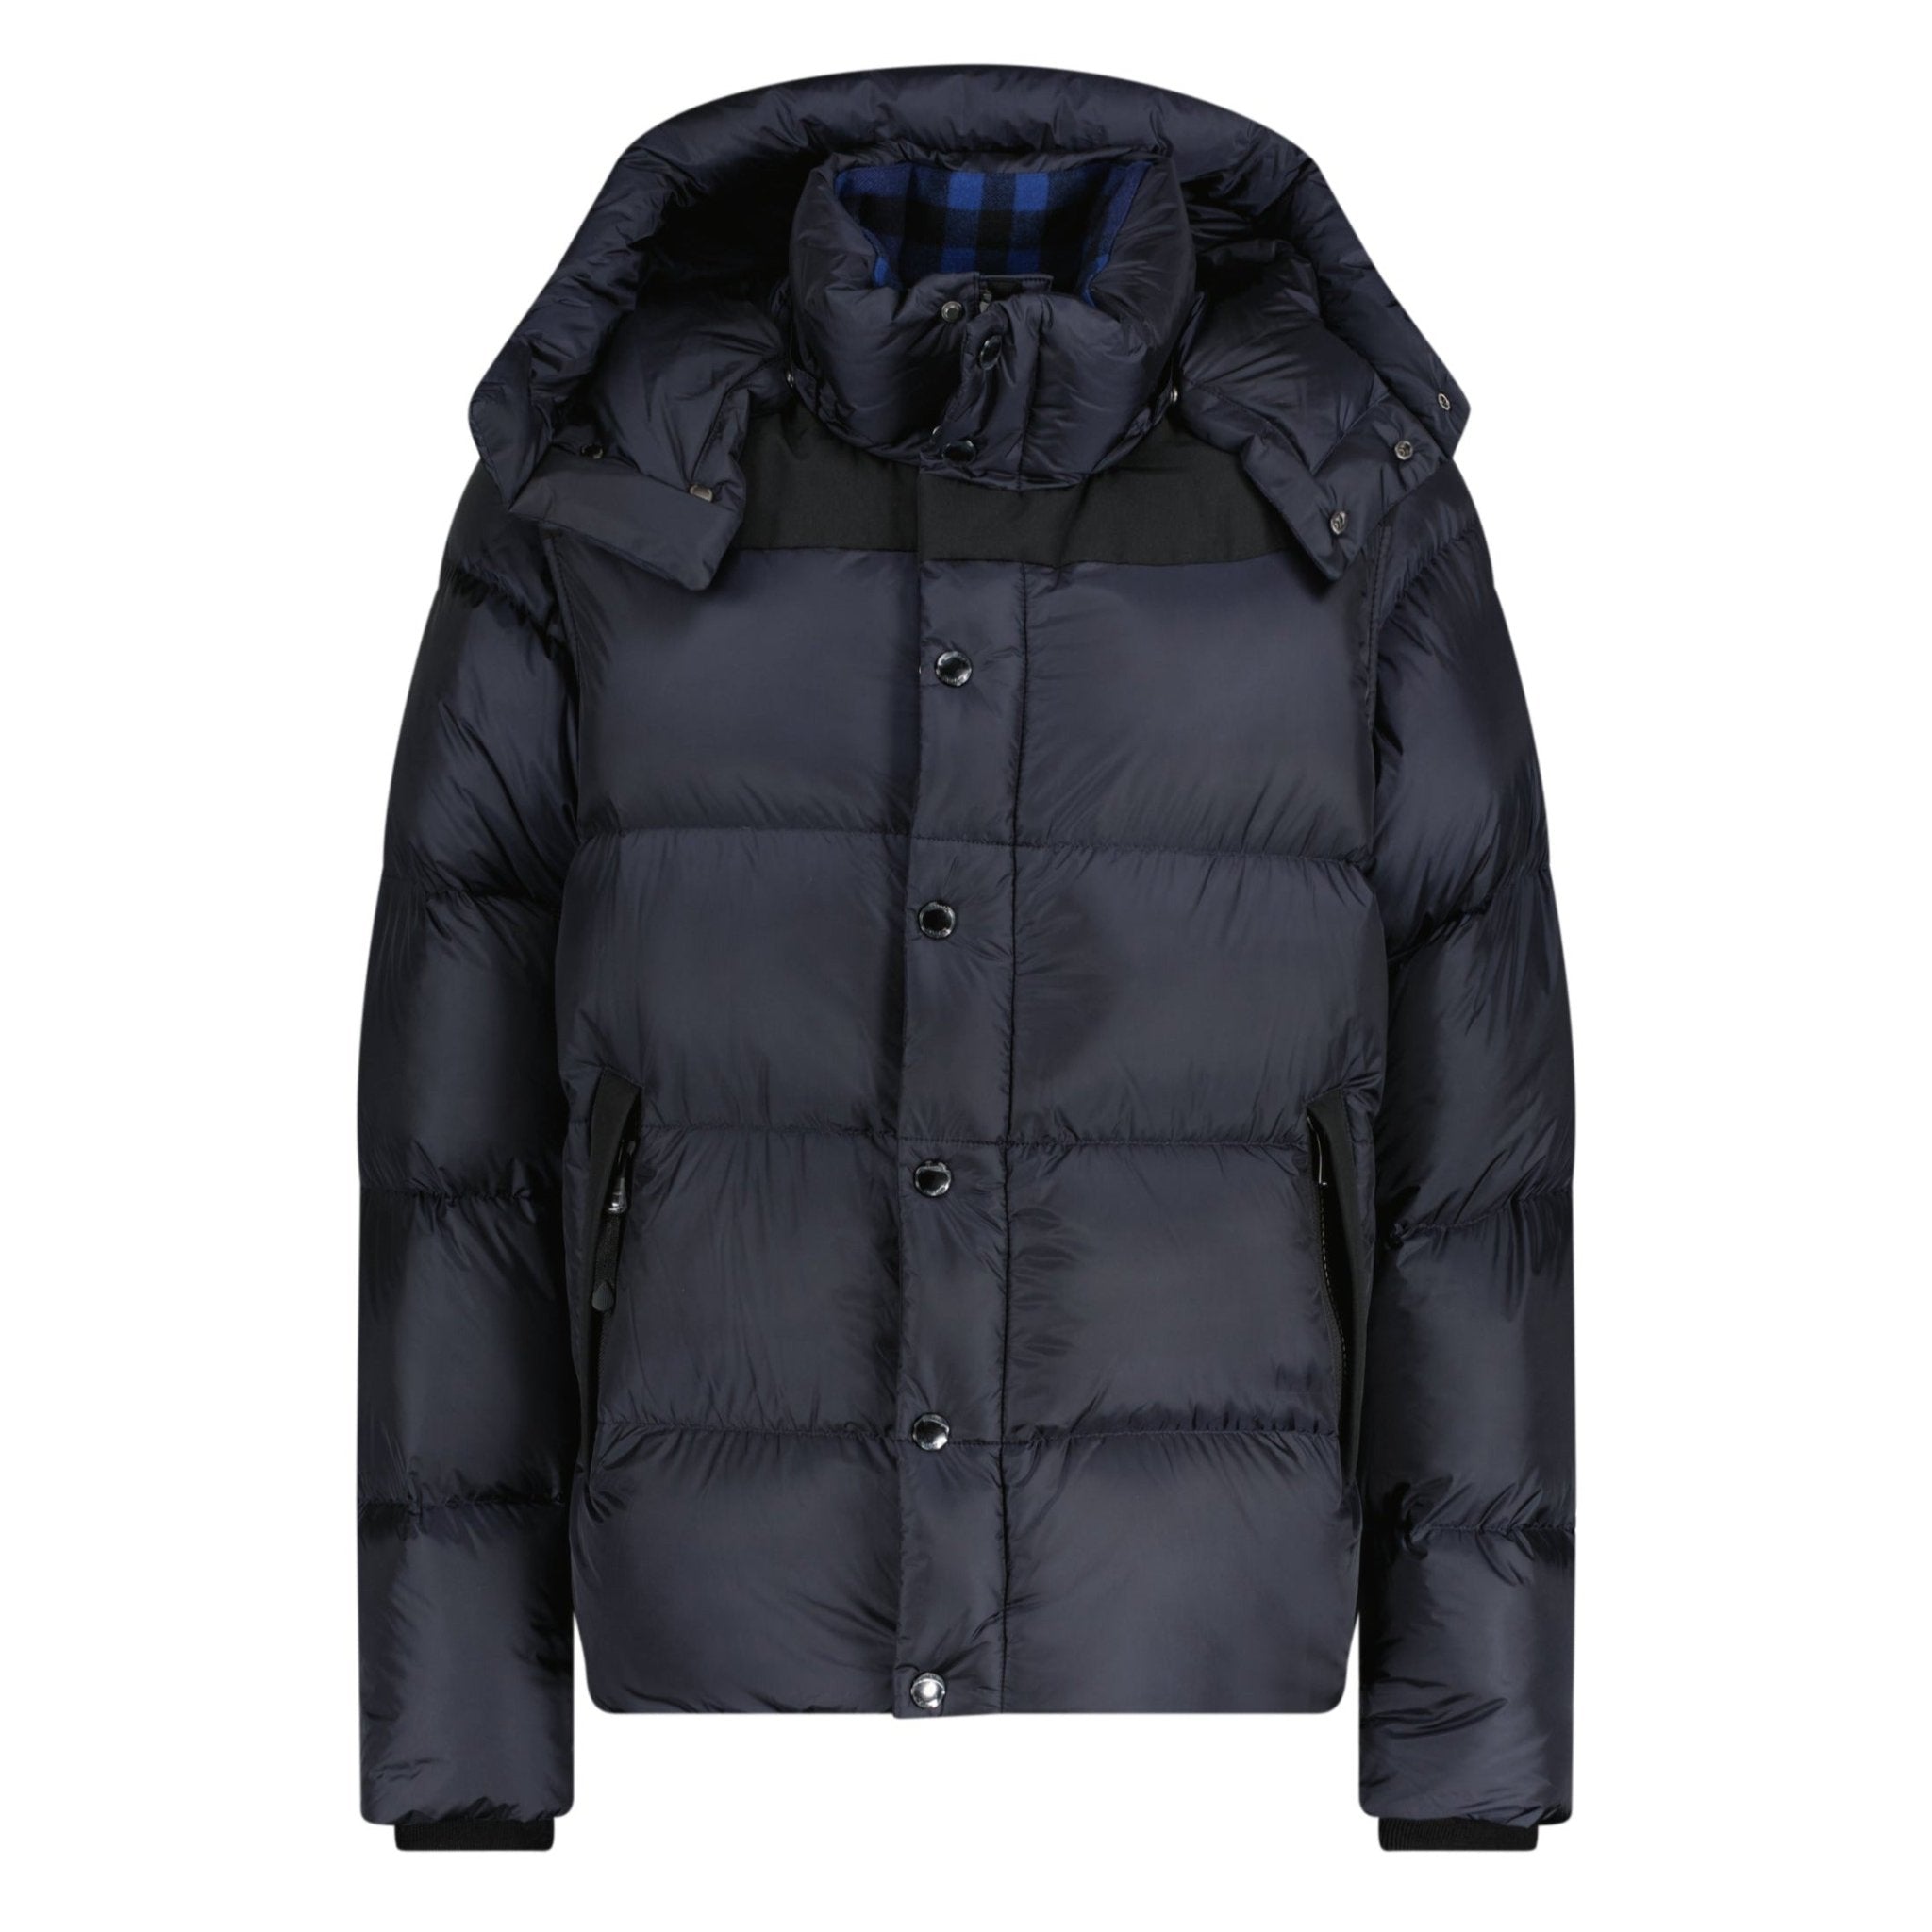 Burberry 'Leeds' Hooded Check Down Jacket Navy | Boinclo ltd | Outlet Sale